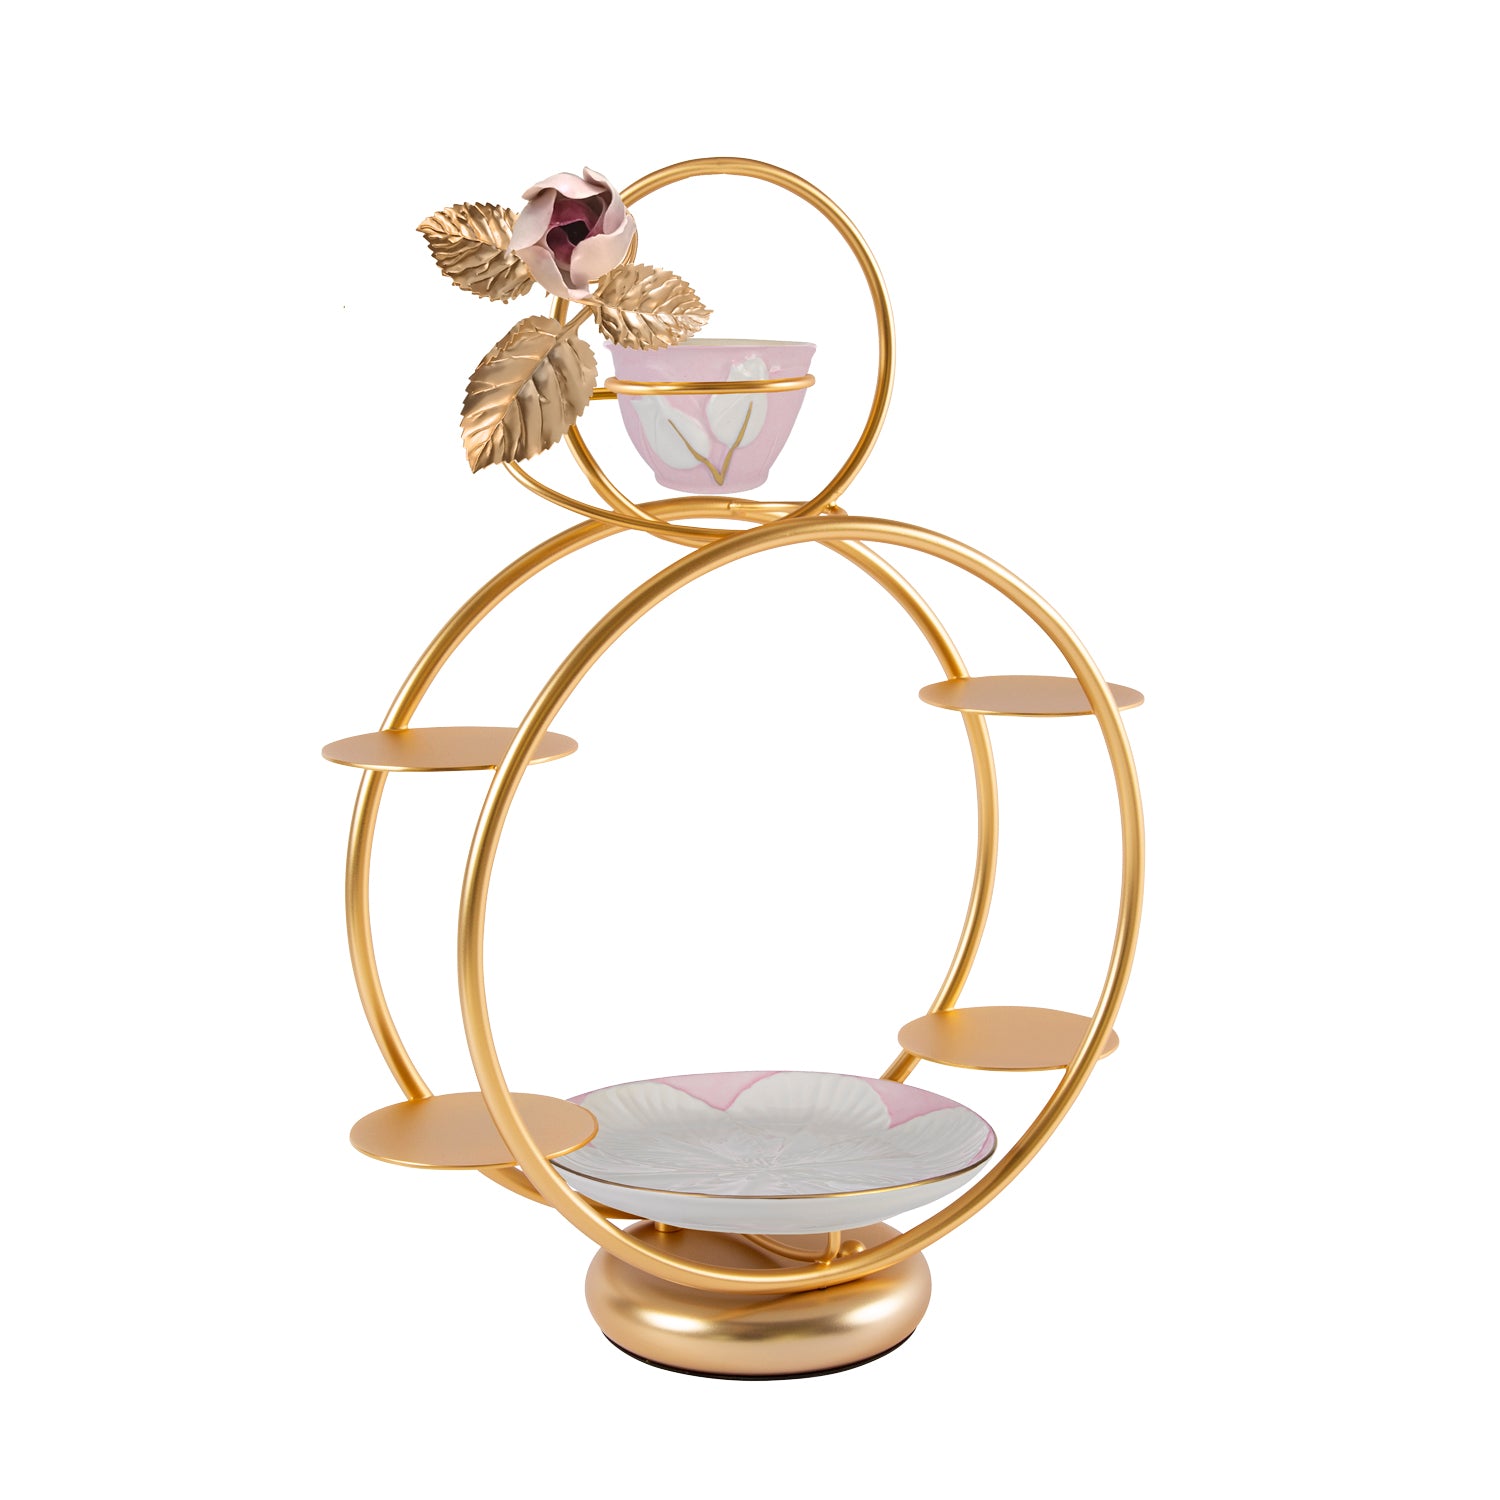 Tulip Round Pastry Holder & Coffee Cup - Pink & White